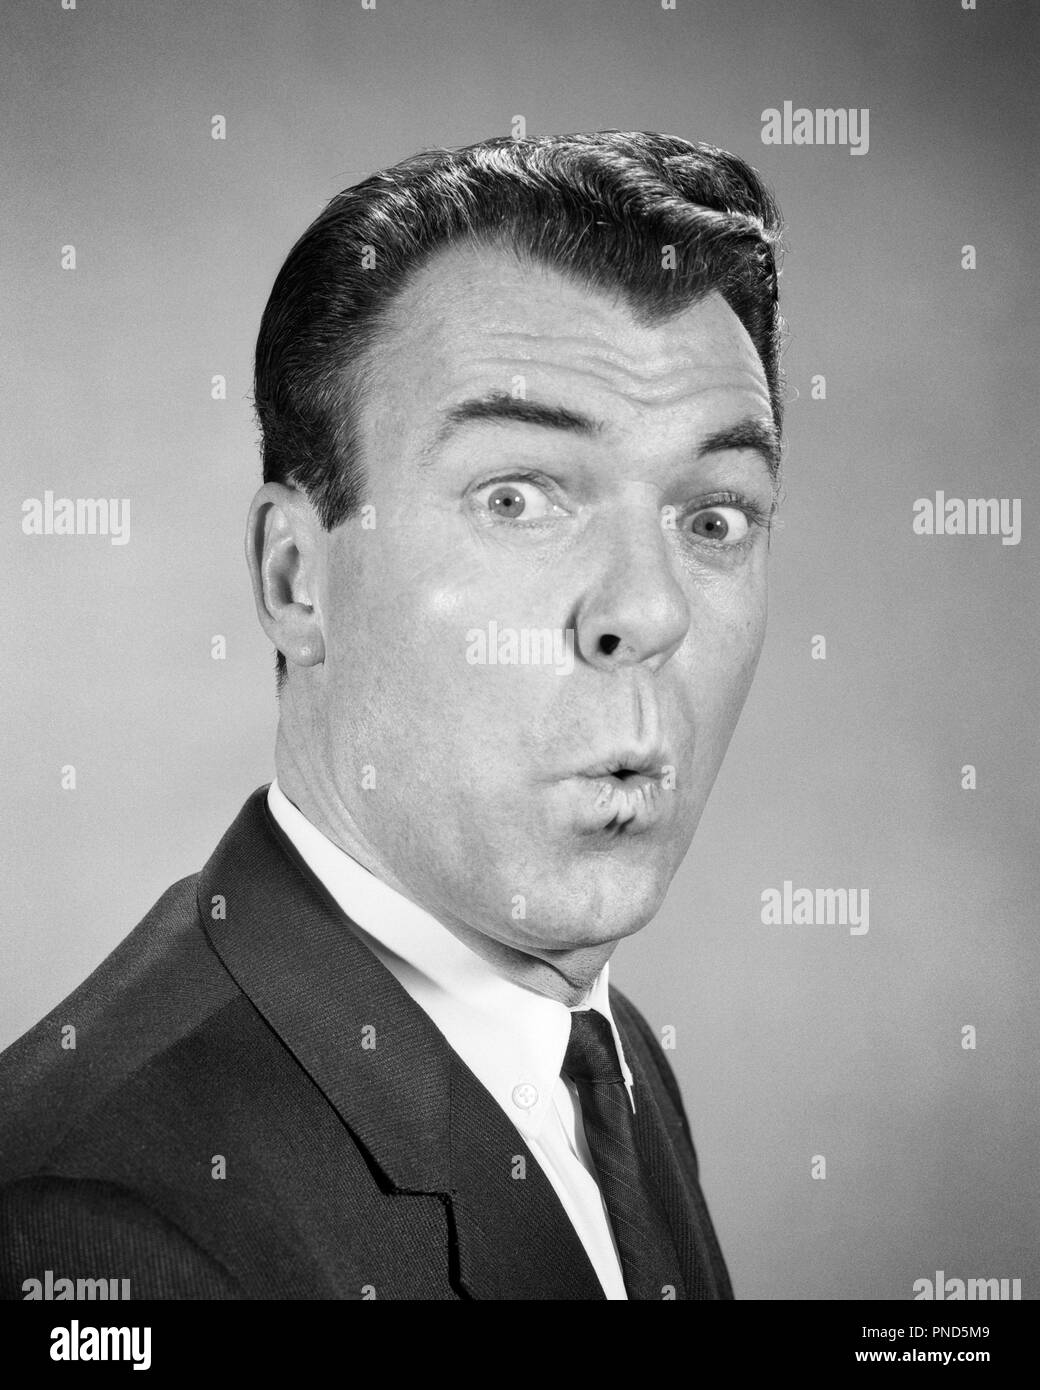 1950s 1960s MAN LOOKING AT CAMERA WITH EYES WIDE LIPS PURSED SURPRISED SHOCKED FACIAL EXPRESSION WHISTLING  - p7021 HAR001 HARS AMAZED B&W WIDE EYE CONTACT BRUNETTE AWE WEIRD HEAD AND SHOULDERS EXCITEMENT ZANY UNCONVENTIONAL PURSED AWED IDIOSYNCRATIC AMUSING ASTONISHED ECCENTRIC EYES WIDE OPEN MID-ADULT MID-ADULT MAN PUCKER WOW BLACK AND WHITE CAUCASIAN ETHNICITY ERRATIC HAR001 OLD FASHIONED Stock Photo